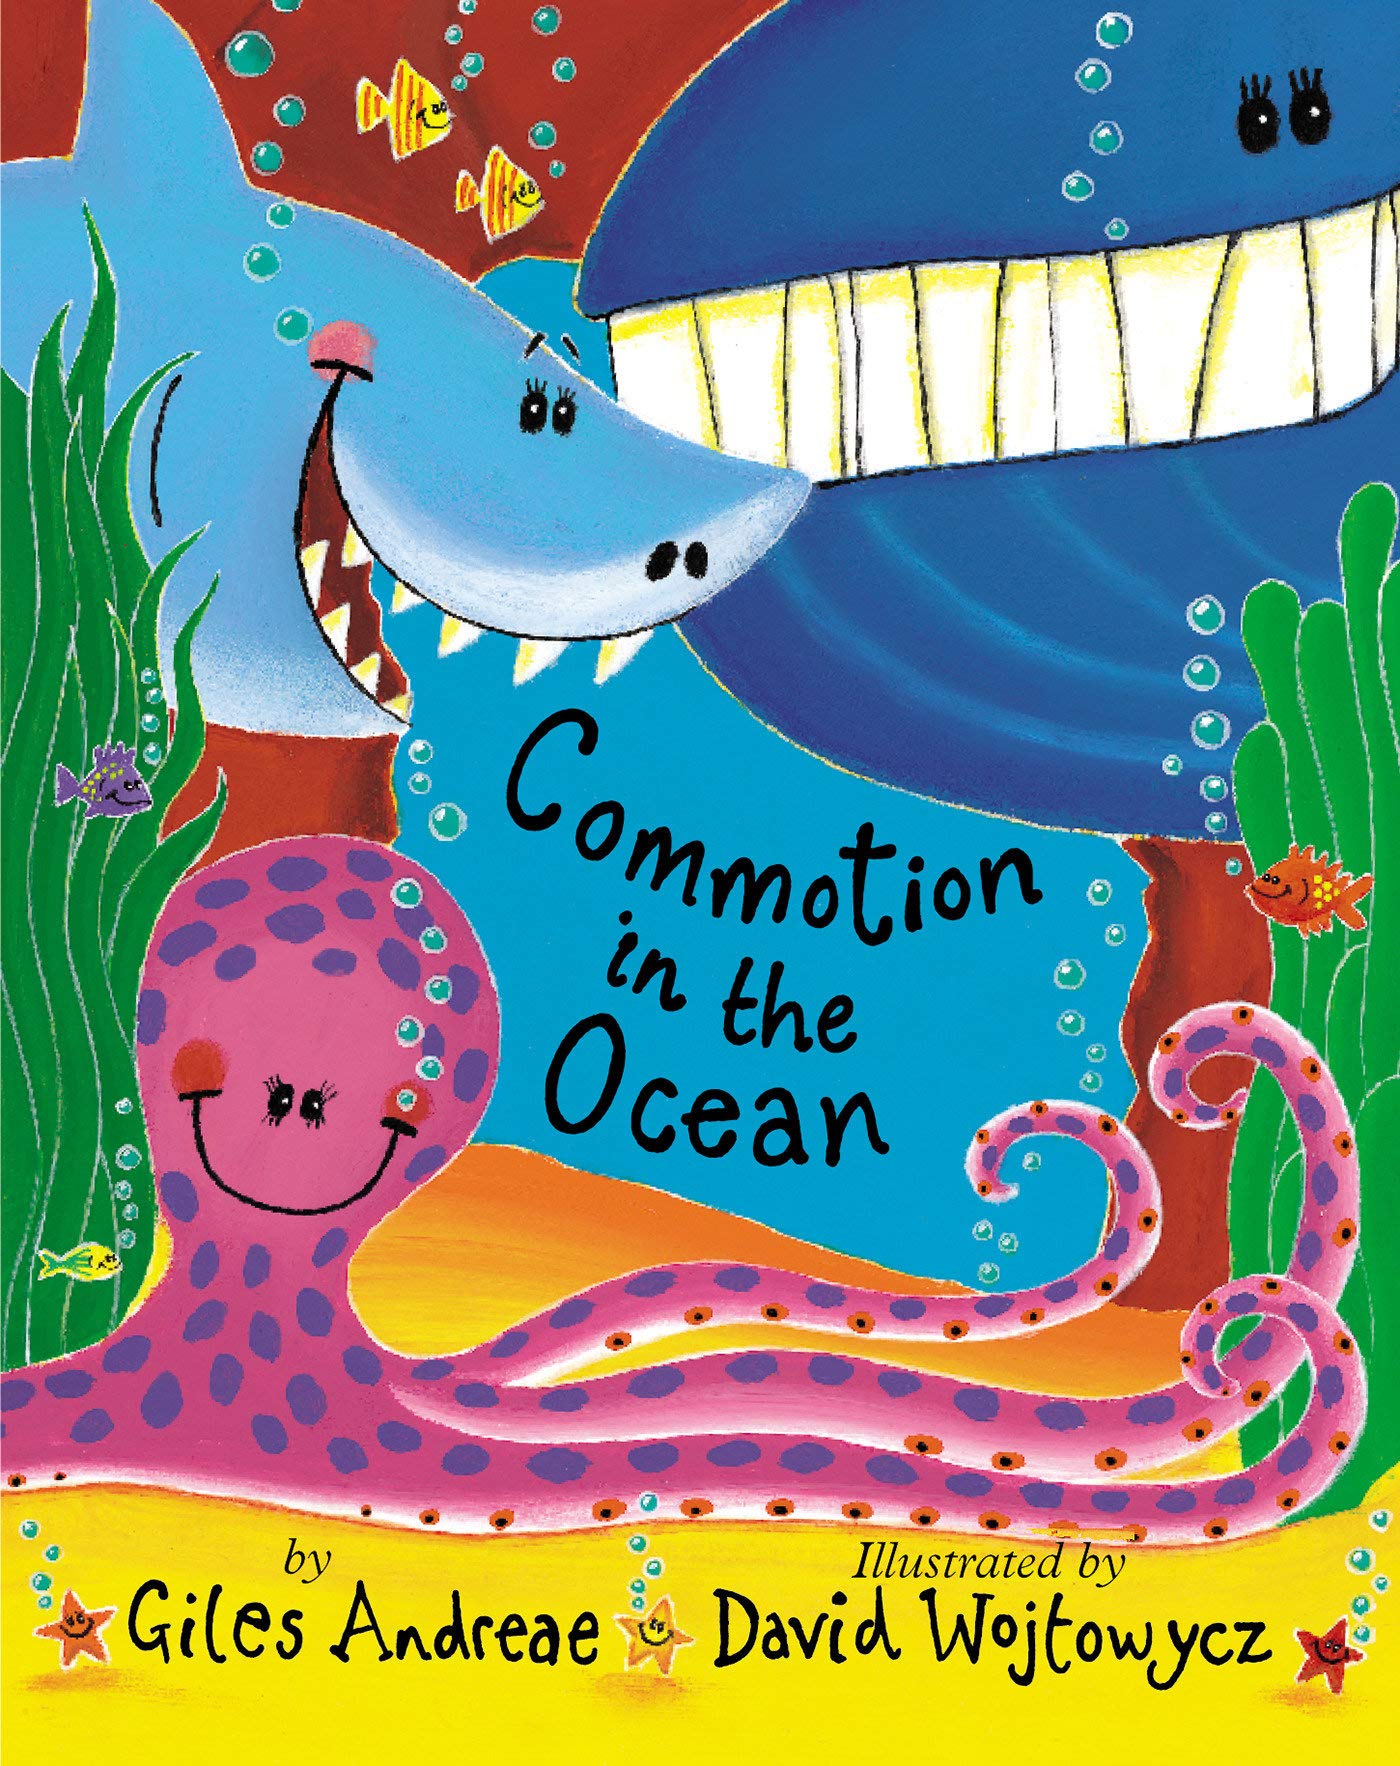 The book cover for Commotion in the Ocean features a blue whale, a blue shark, and a purple octopus. 